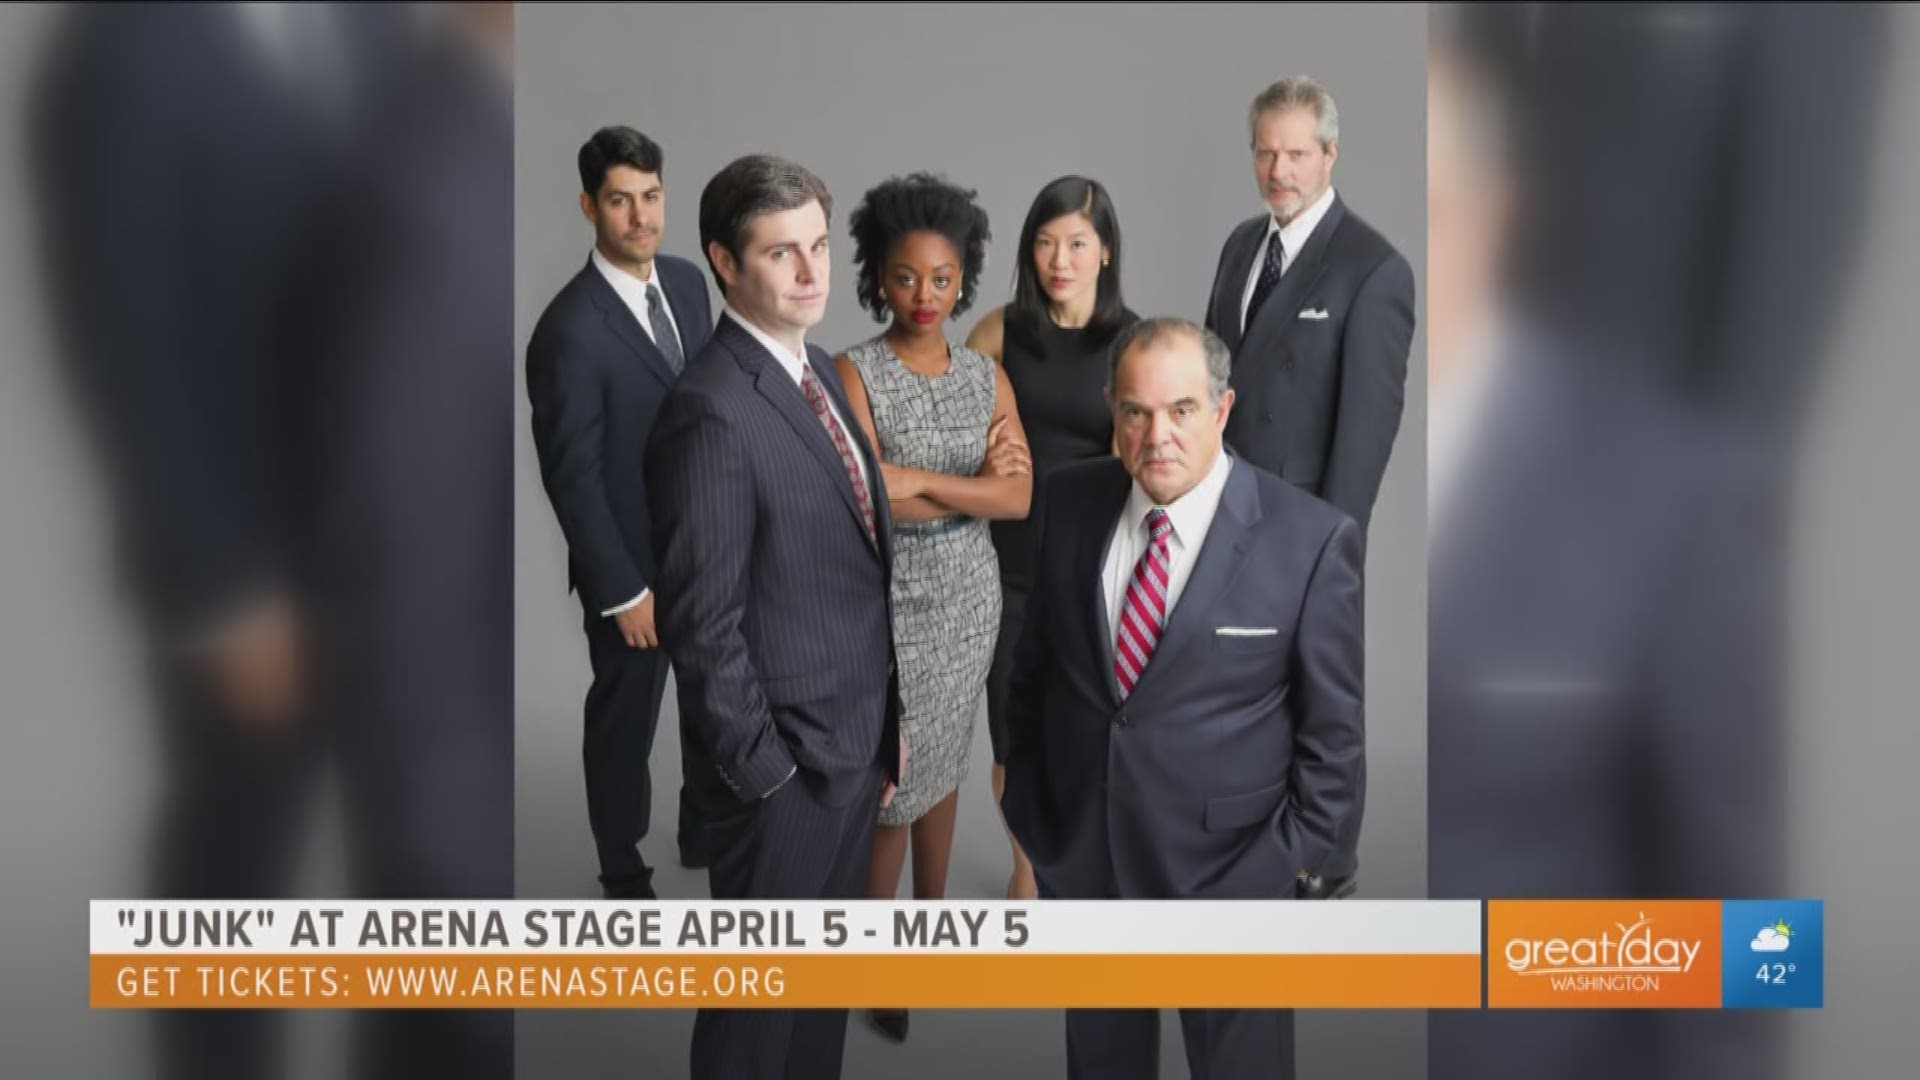 Pulitzer-prize winning playwright Ayad Akhtar brings his new play "Junk" to Arena Stage April 5th -May 5th. Actors Thomas Keegen and Nancy Sun share their take on the play that brings Wall Street to life. To get tickets go to www.ArenaStage.org